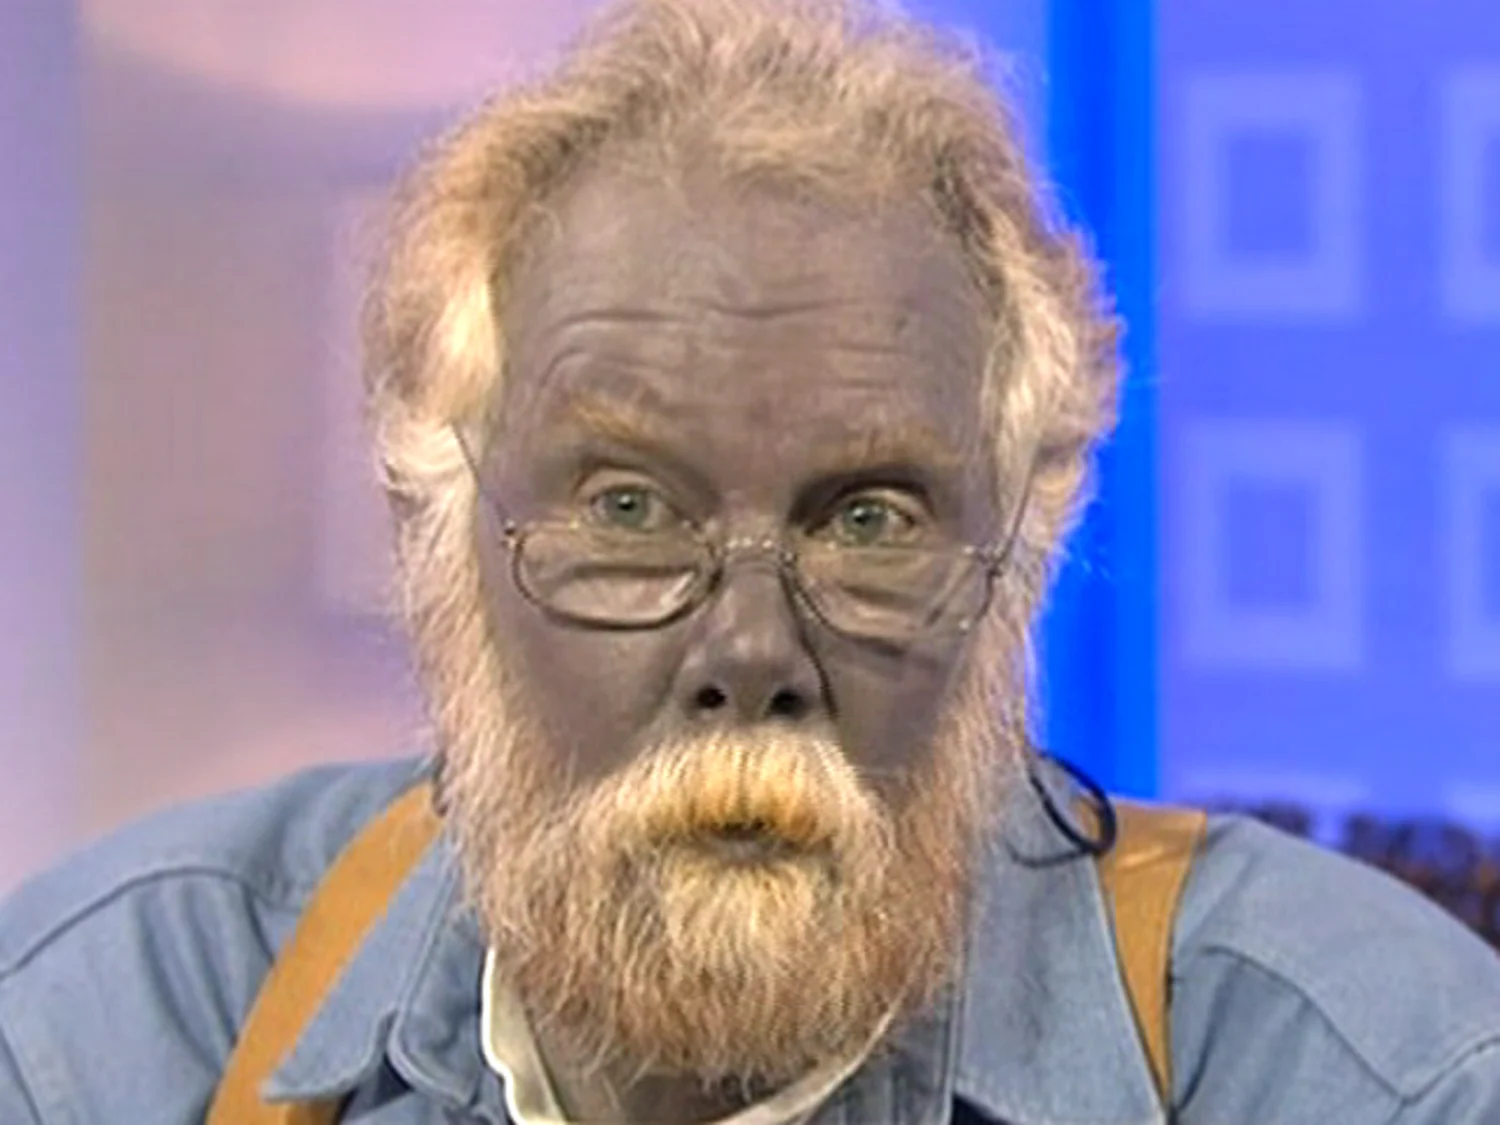 paul-karason-the-man-who-turned-blue-from-colloidal-silver